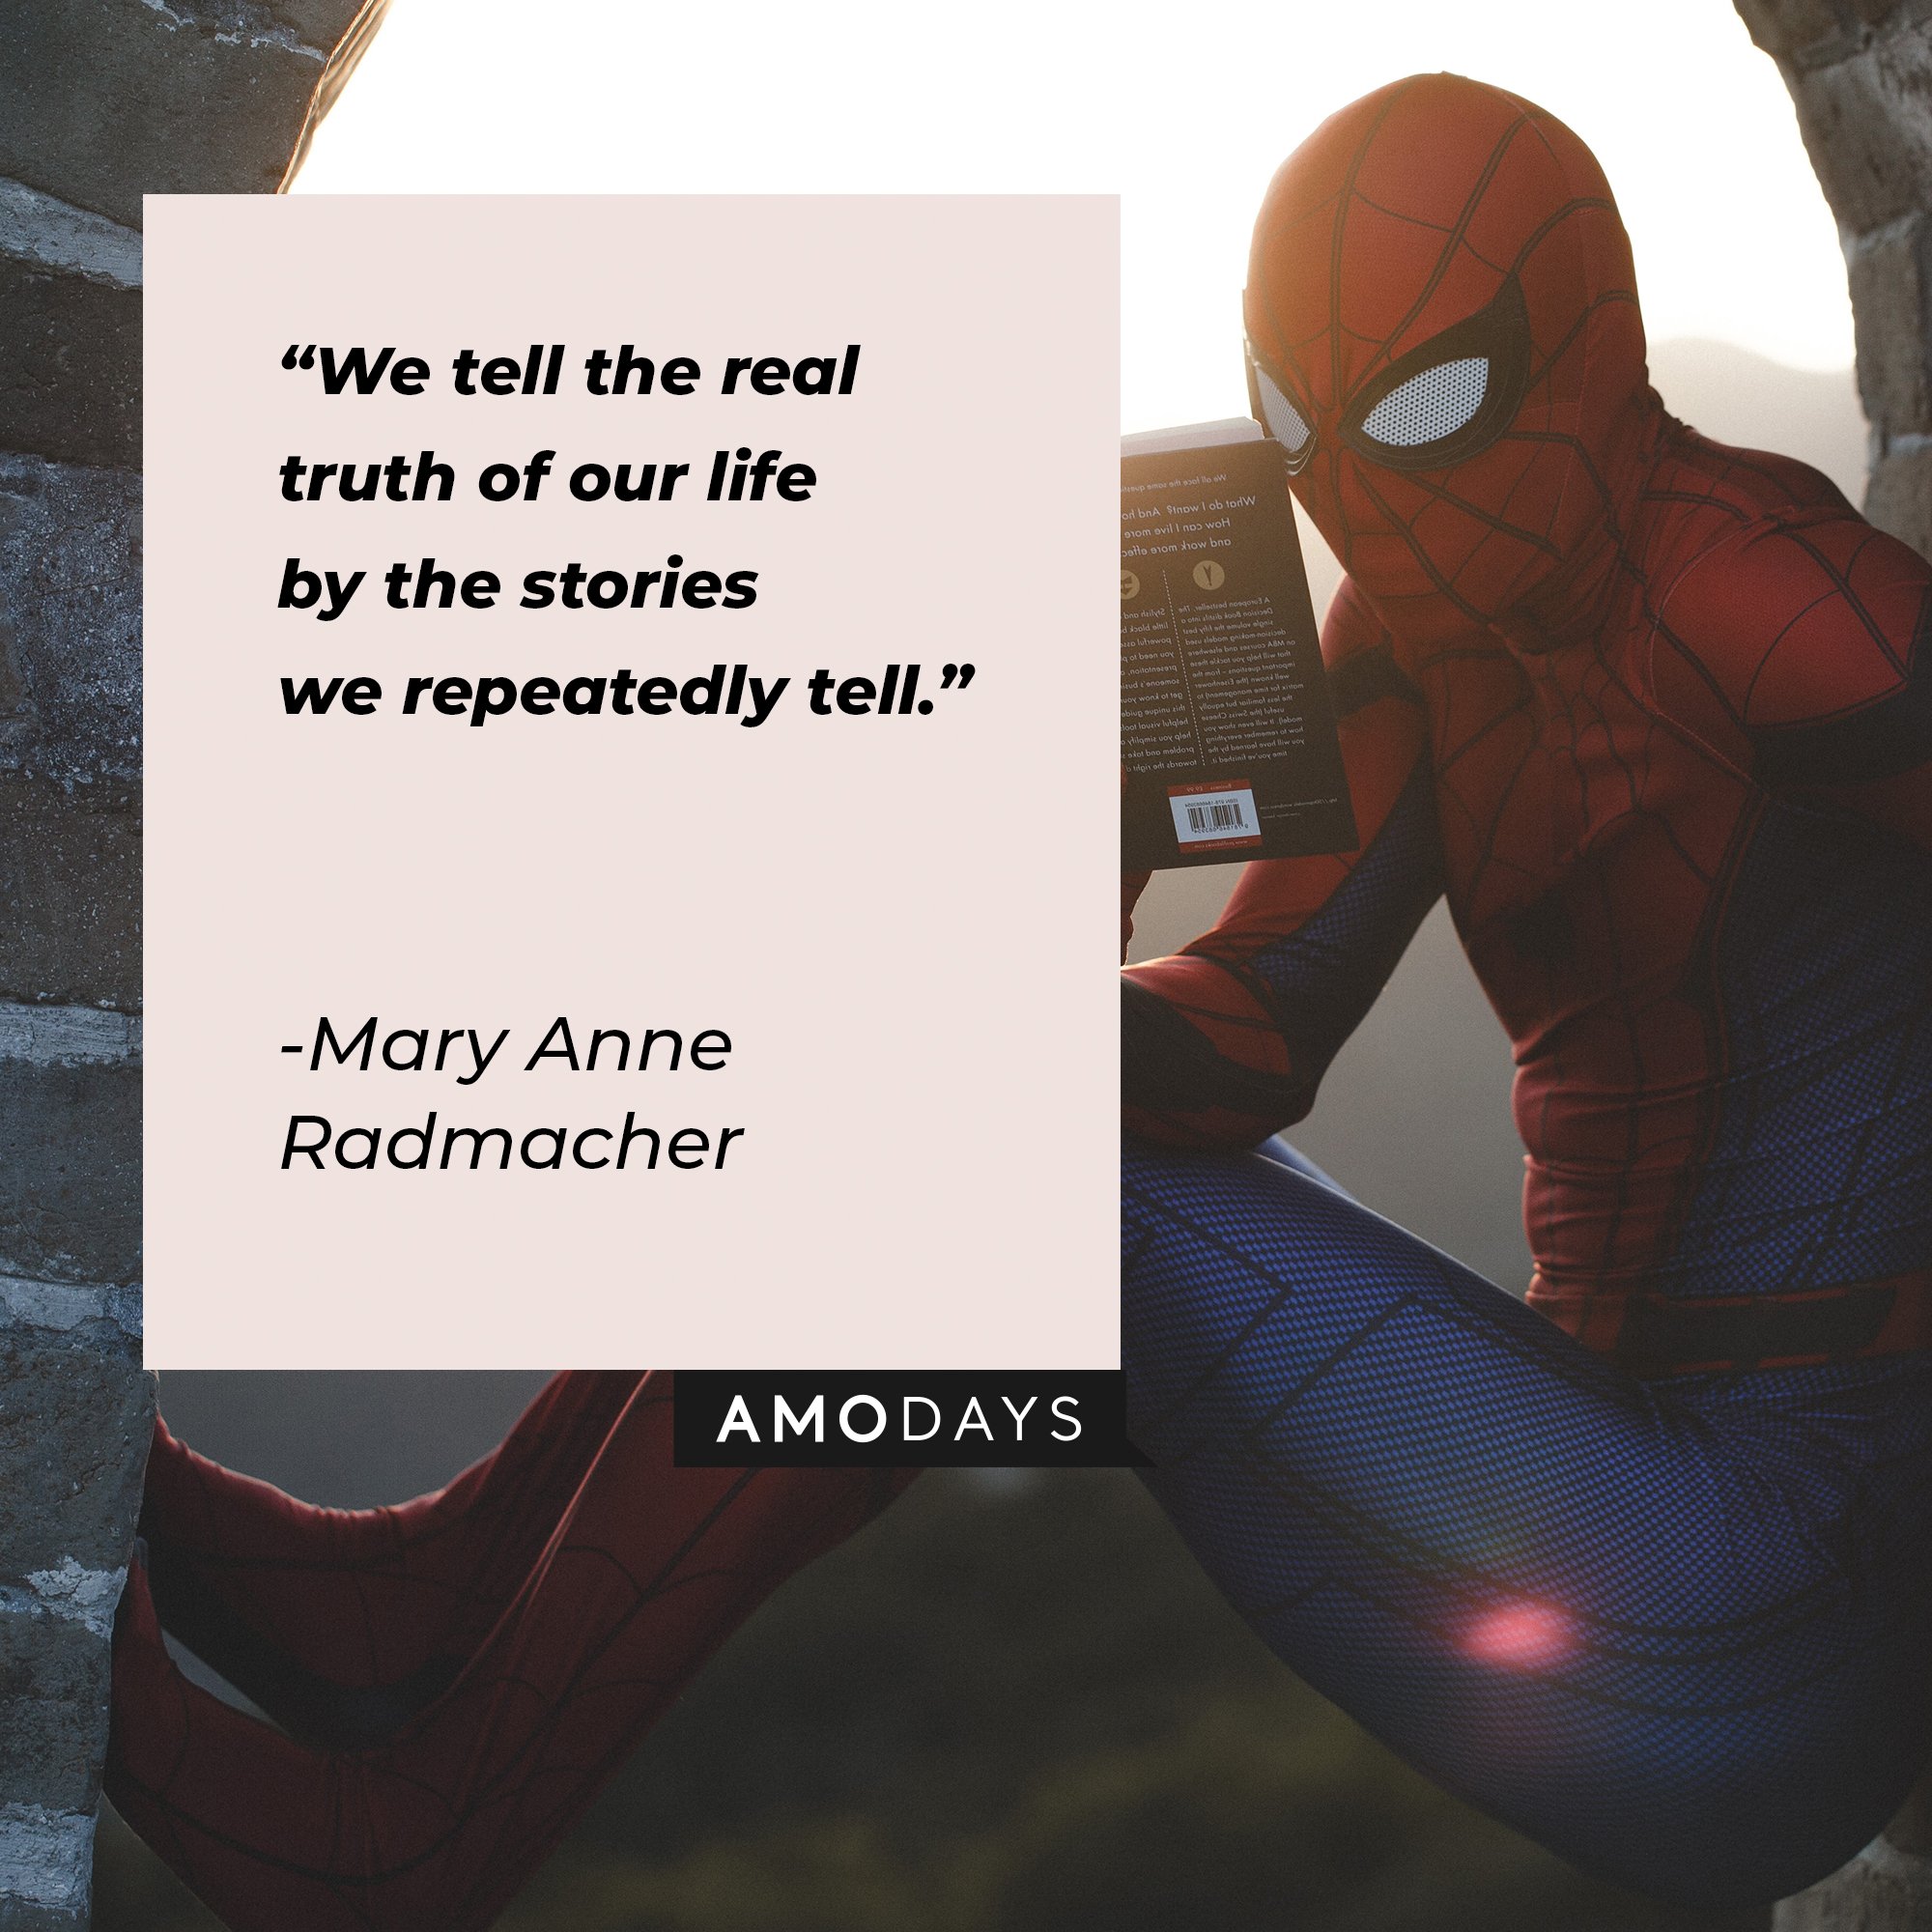 Mary Anne Radmacher’s quote: "We tell the real truth of our life by the stories we repeatedly tell." | Image: AmoDays